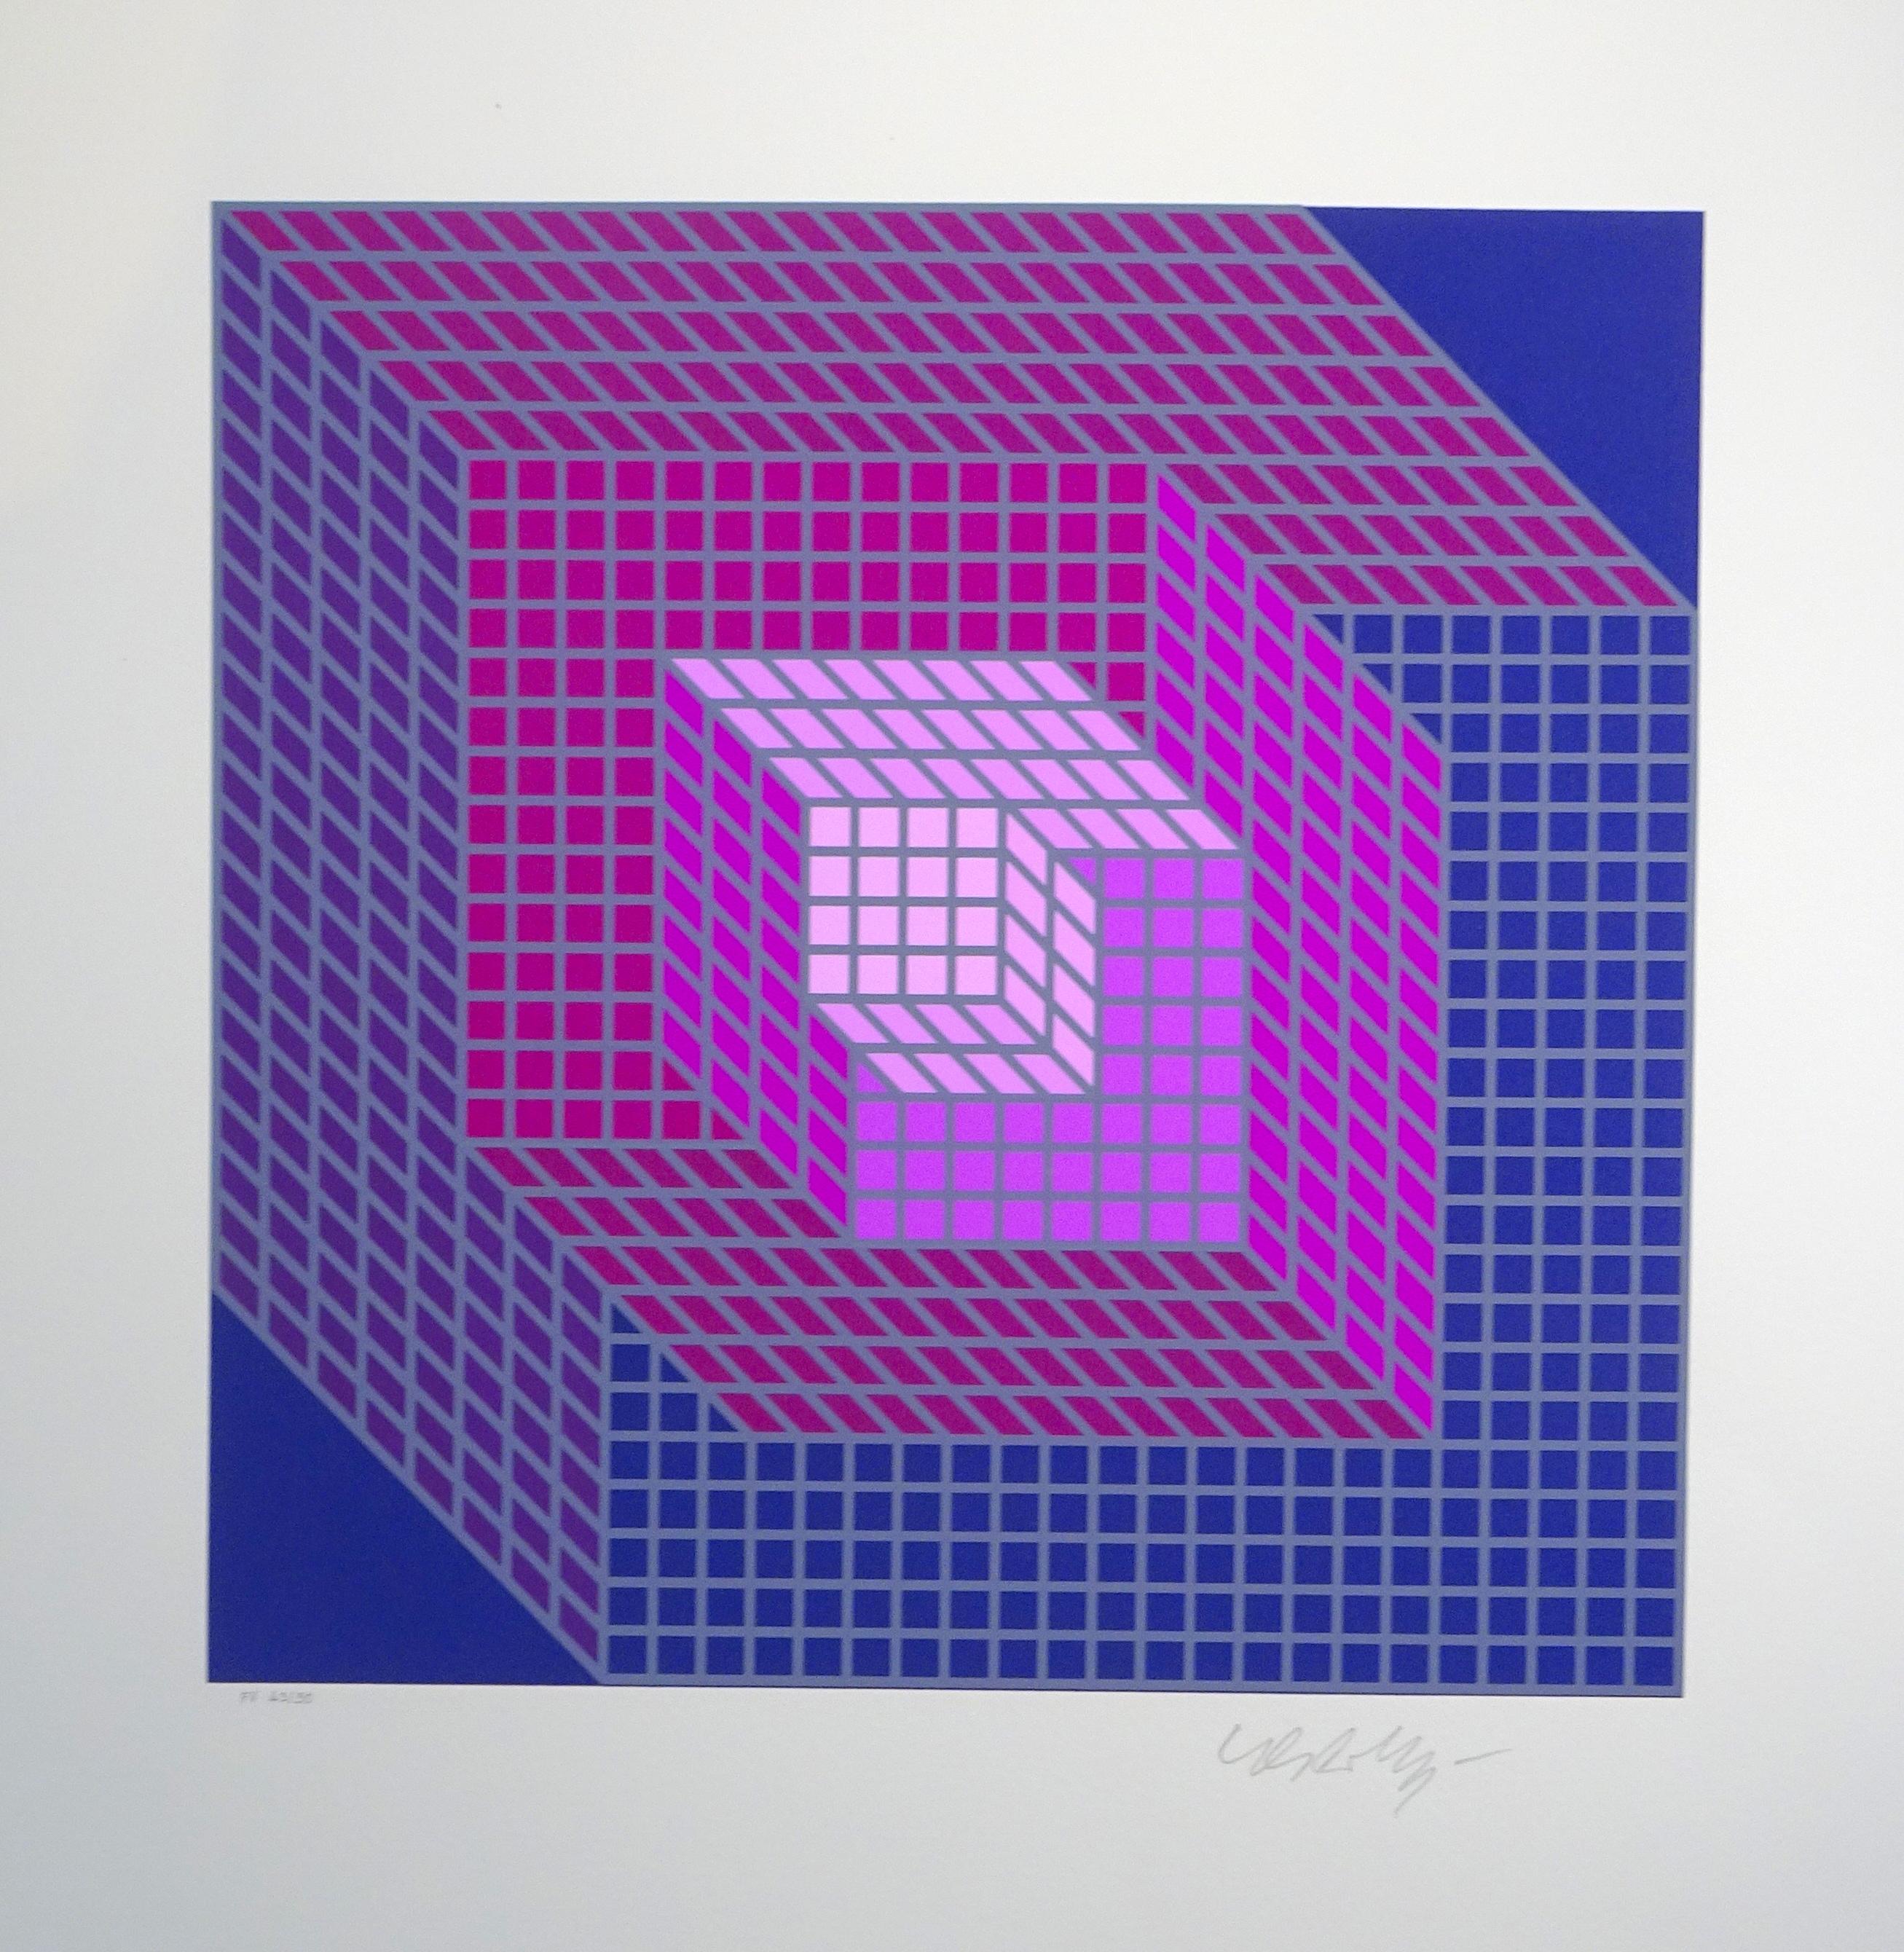 Geometrische Komposition - Violet is a beautiful original serigraph of Op-Art realized by Victor Vasarely.
Numbered (43/50) on the lower left and signed on the lower right in pencil.

Perfect conditions.

Image Dimensions: 30 x 30 cm
